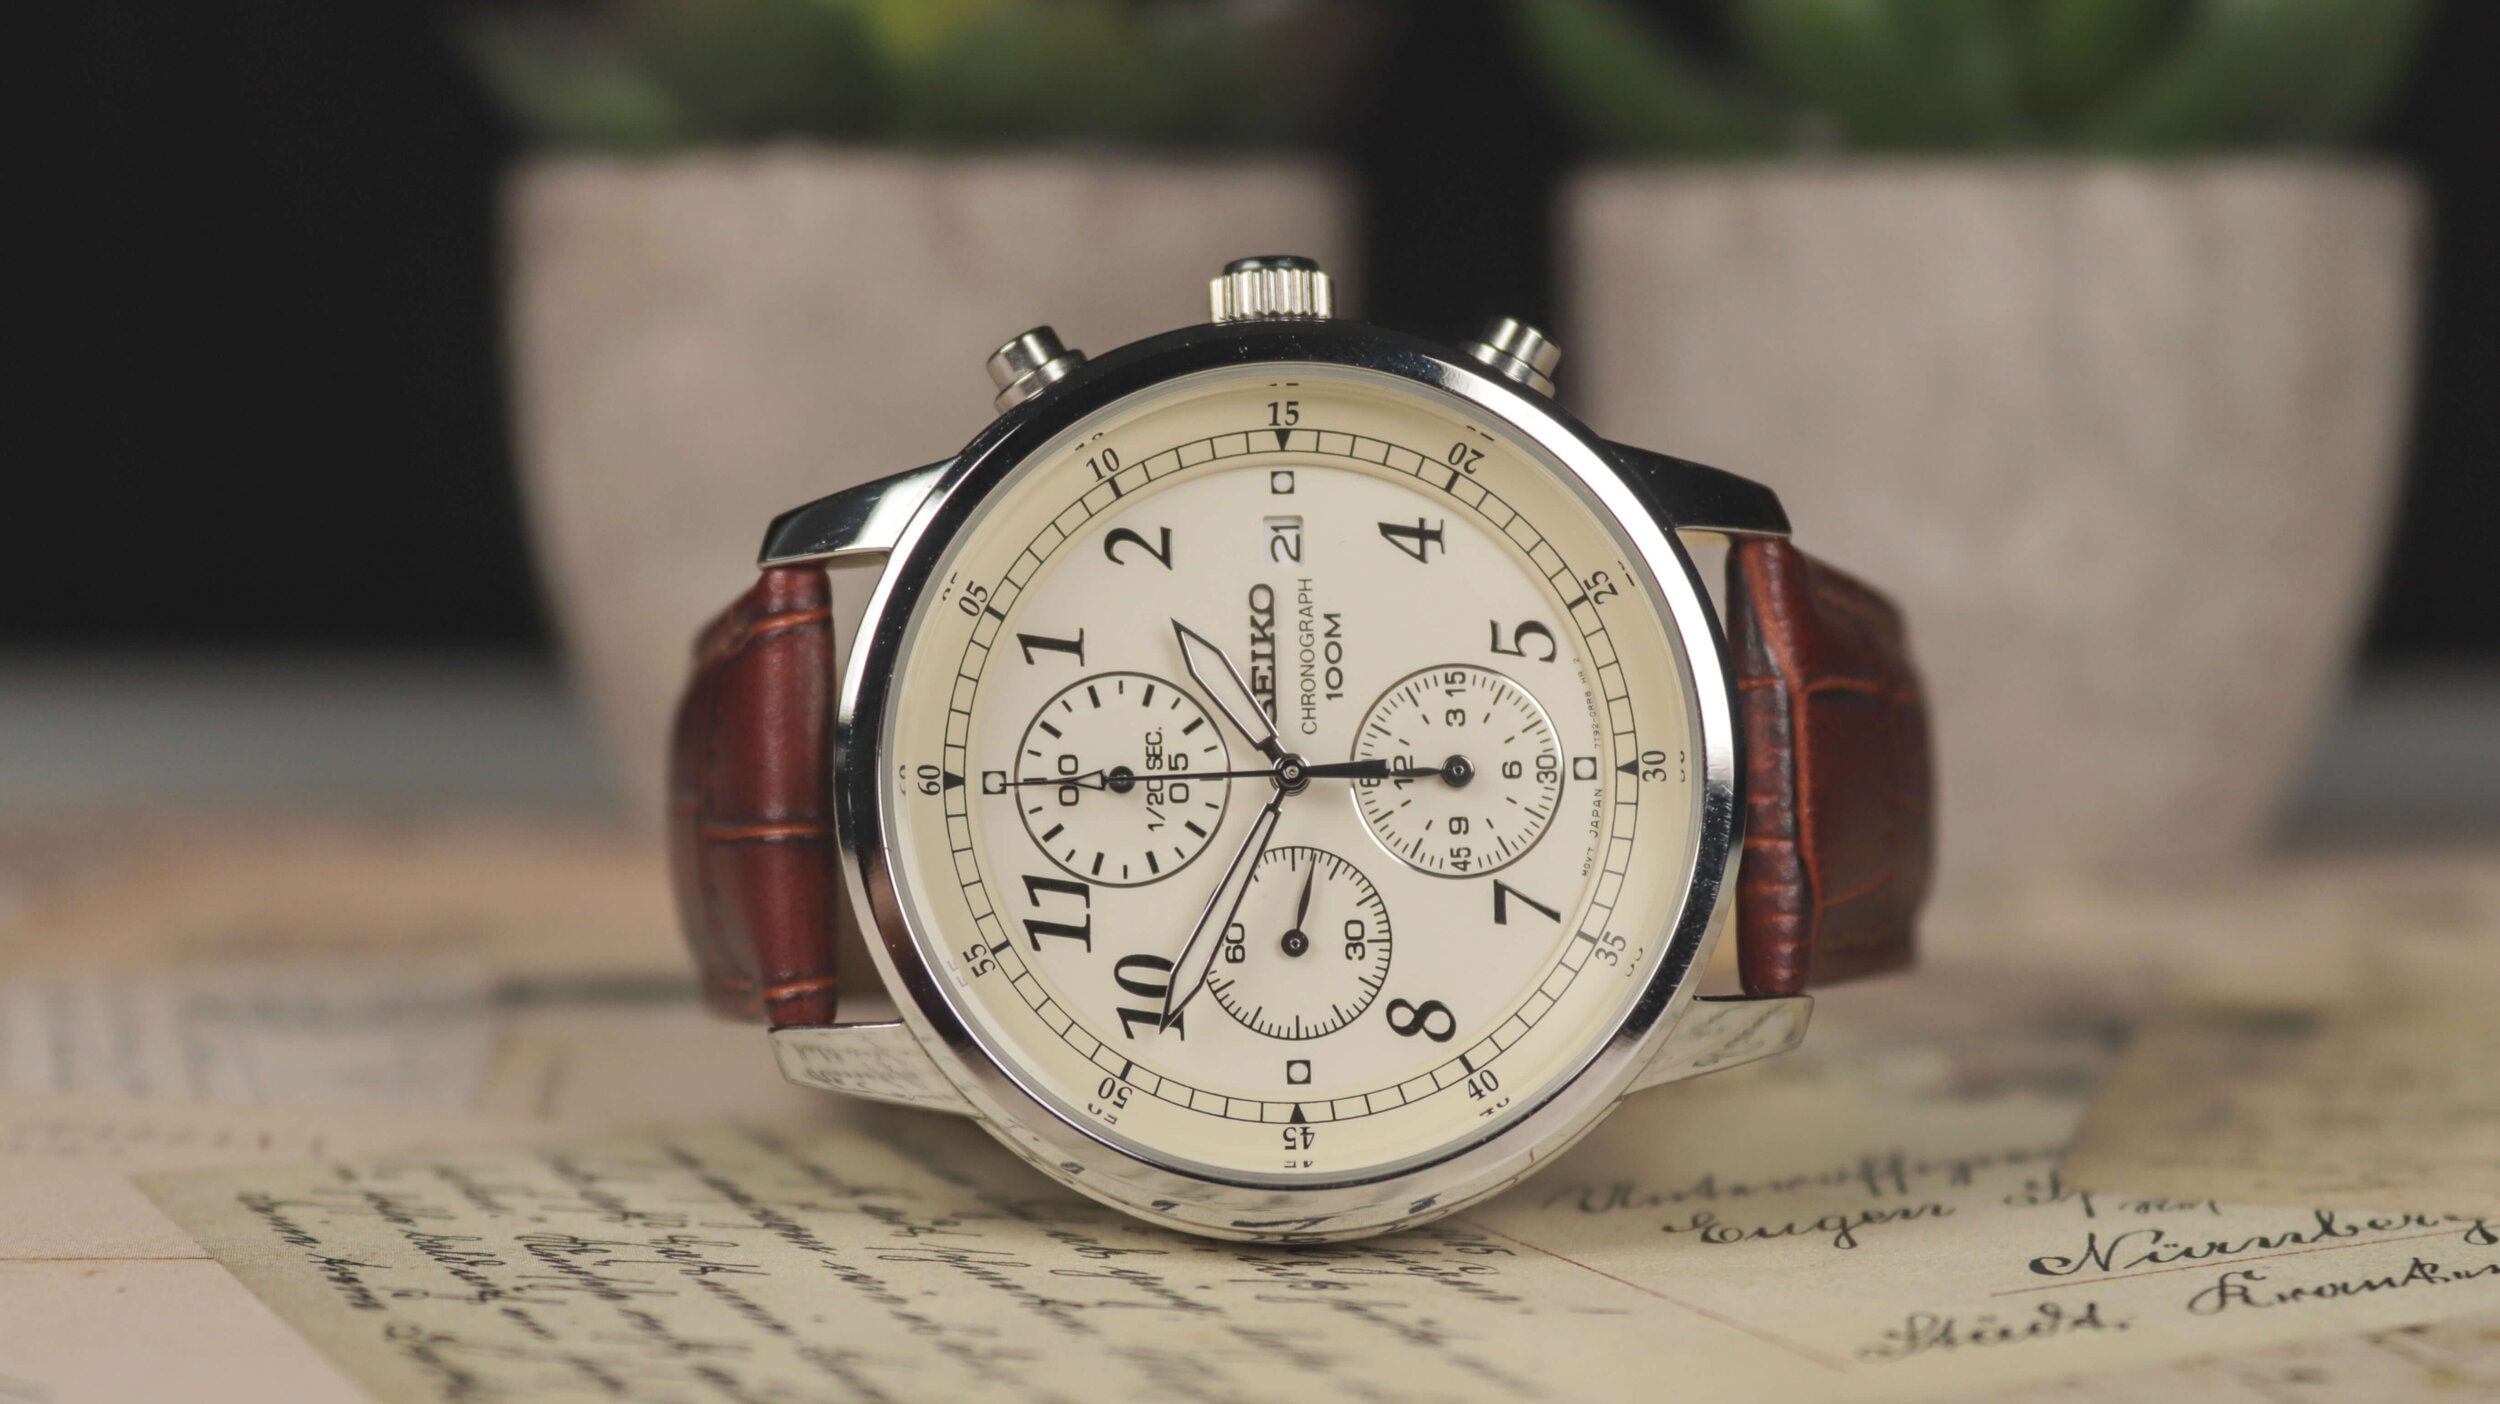 Seiko SNDC31 Review - The Best Classic Chronograph Under £100 — Ben's Watch  Club